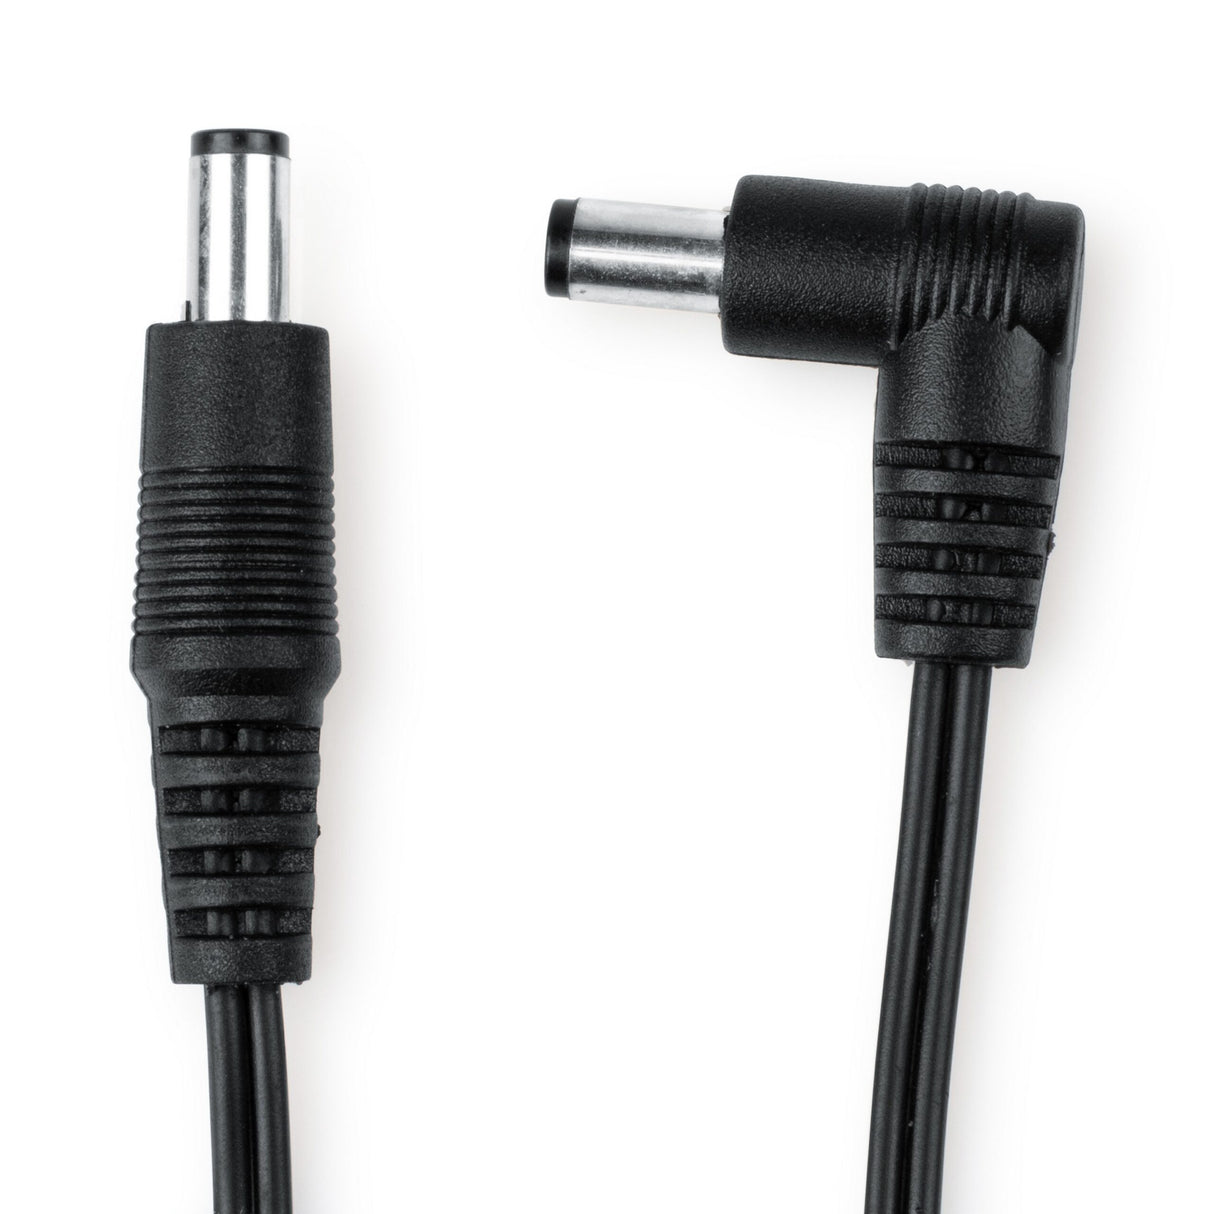 Gator GTR-PWR-DCP40 Single DC Power Cable for Pedals, 40 Inch